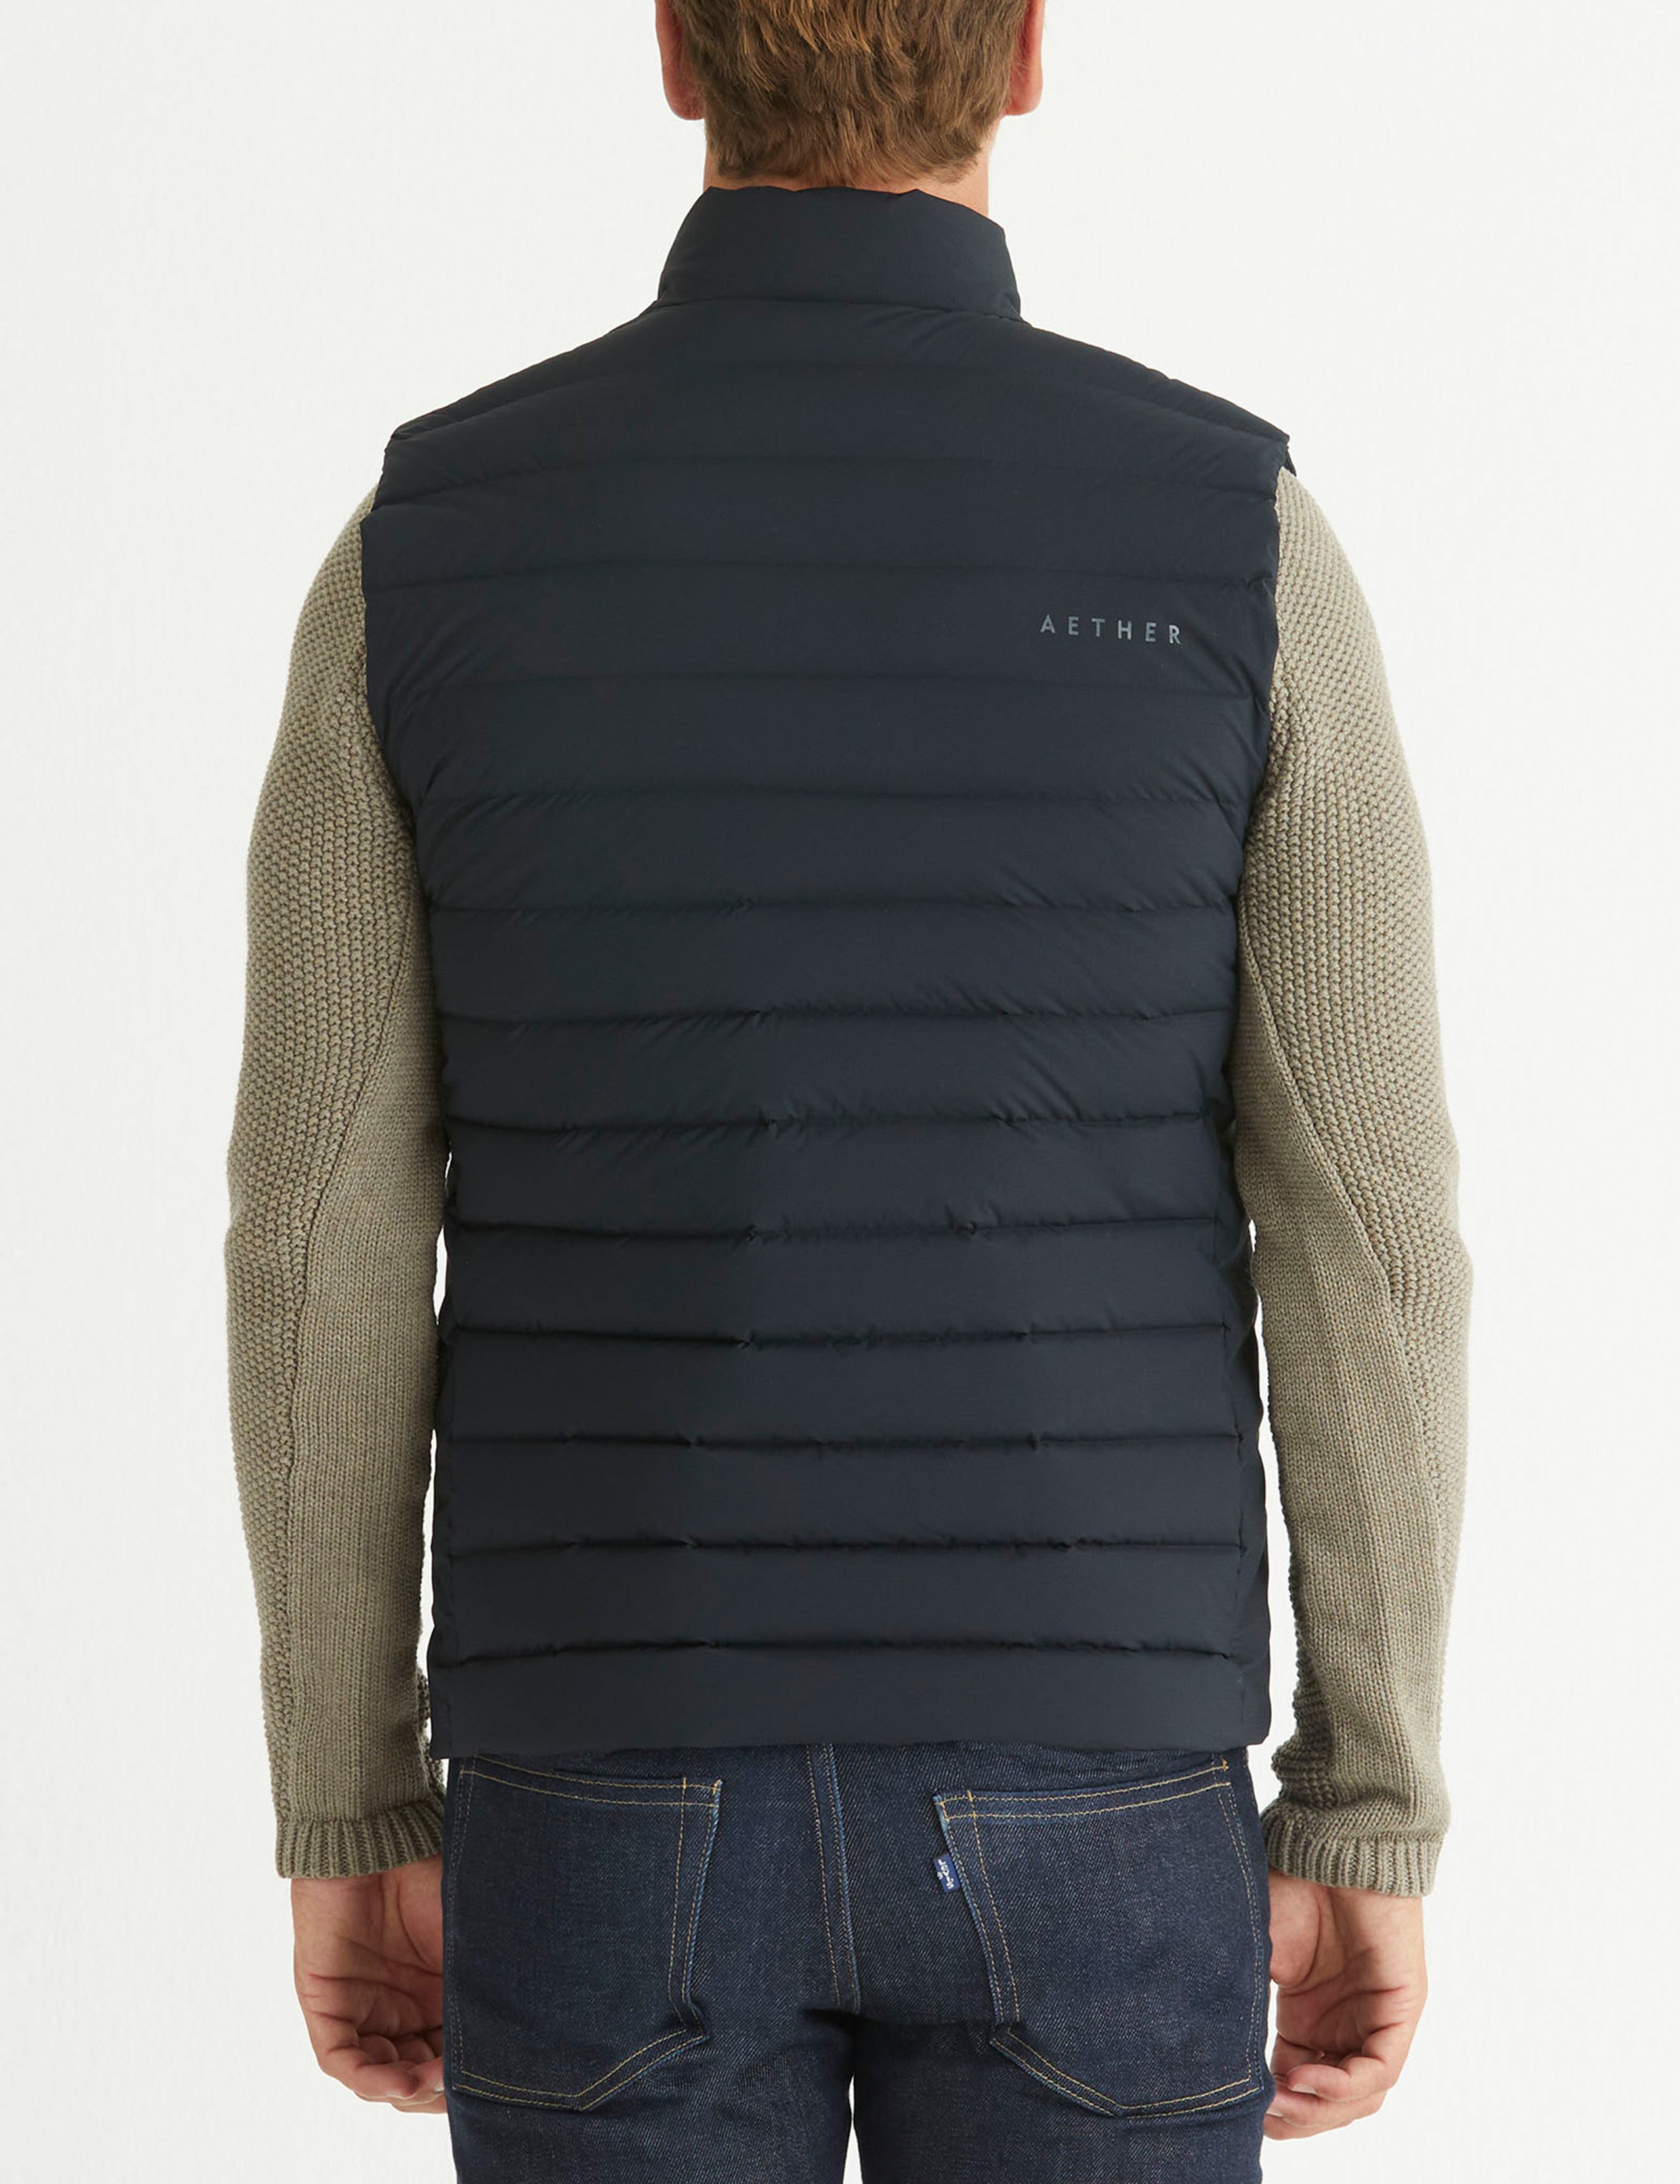 man wearing black insulated vest